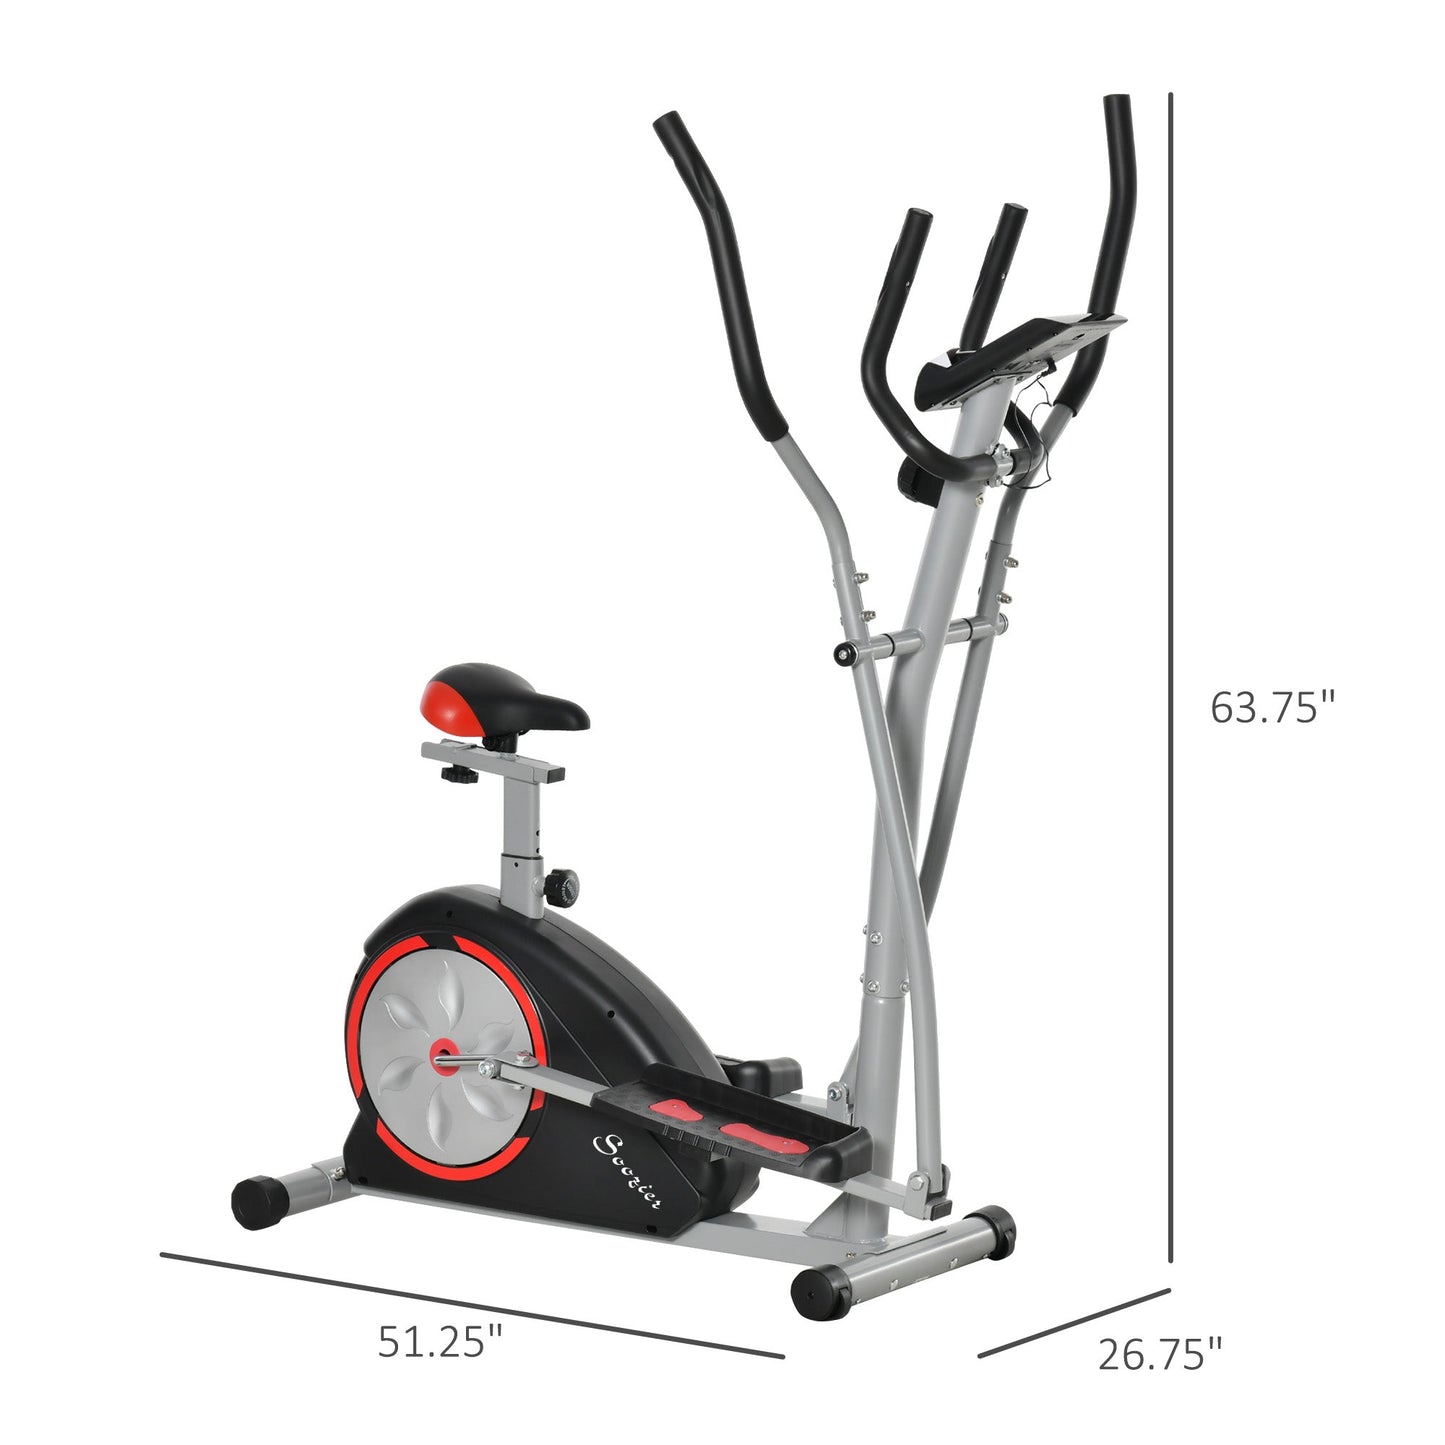 Sports and Fitness-2-in-1 Elliptical and Bike Cross Trainer with LCD Screen and Magnetic Resistance for Home Gym Use - Outdoor Style Company